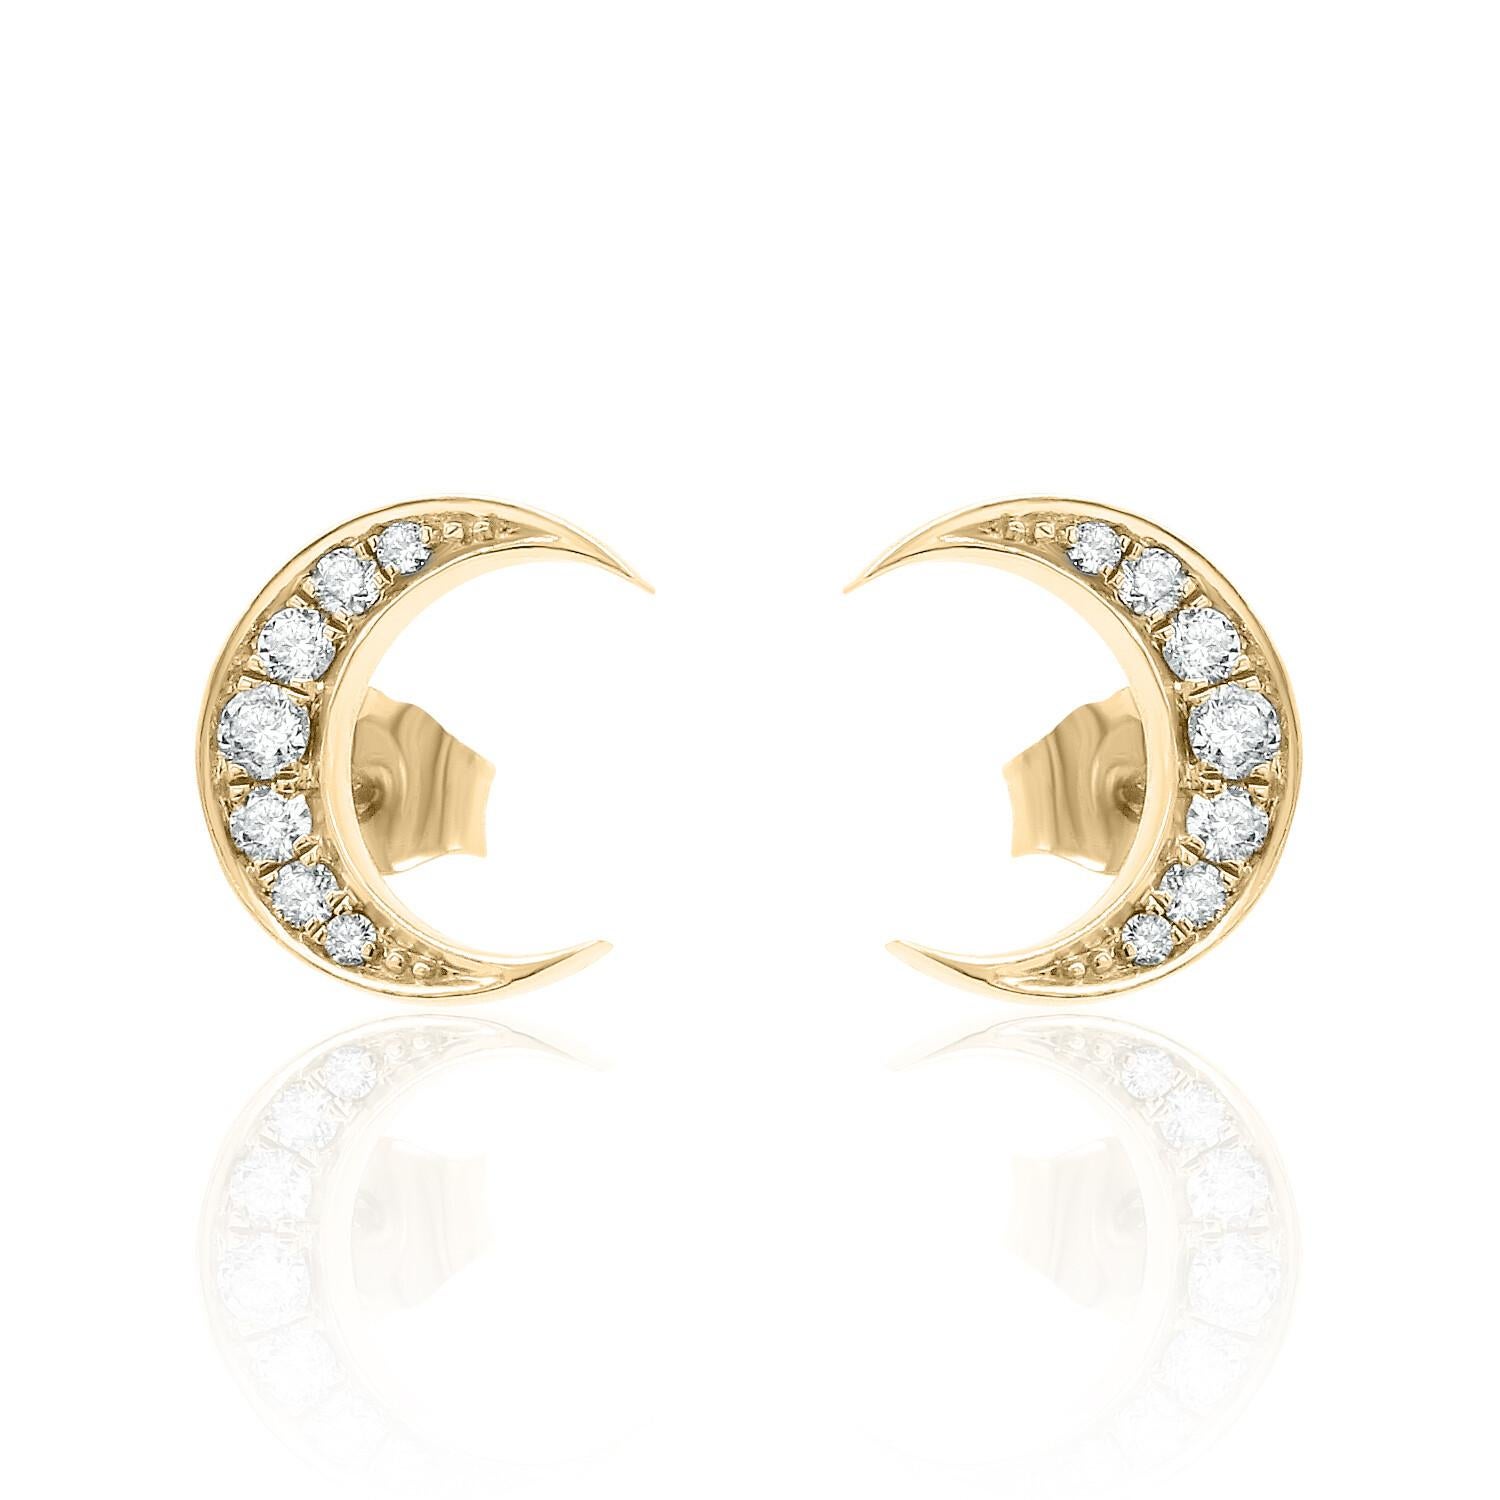 Contemporary Crescent Moon Diamond Earrings 14K White, Yellow, and Rose Gold